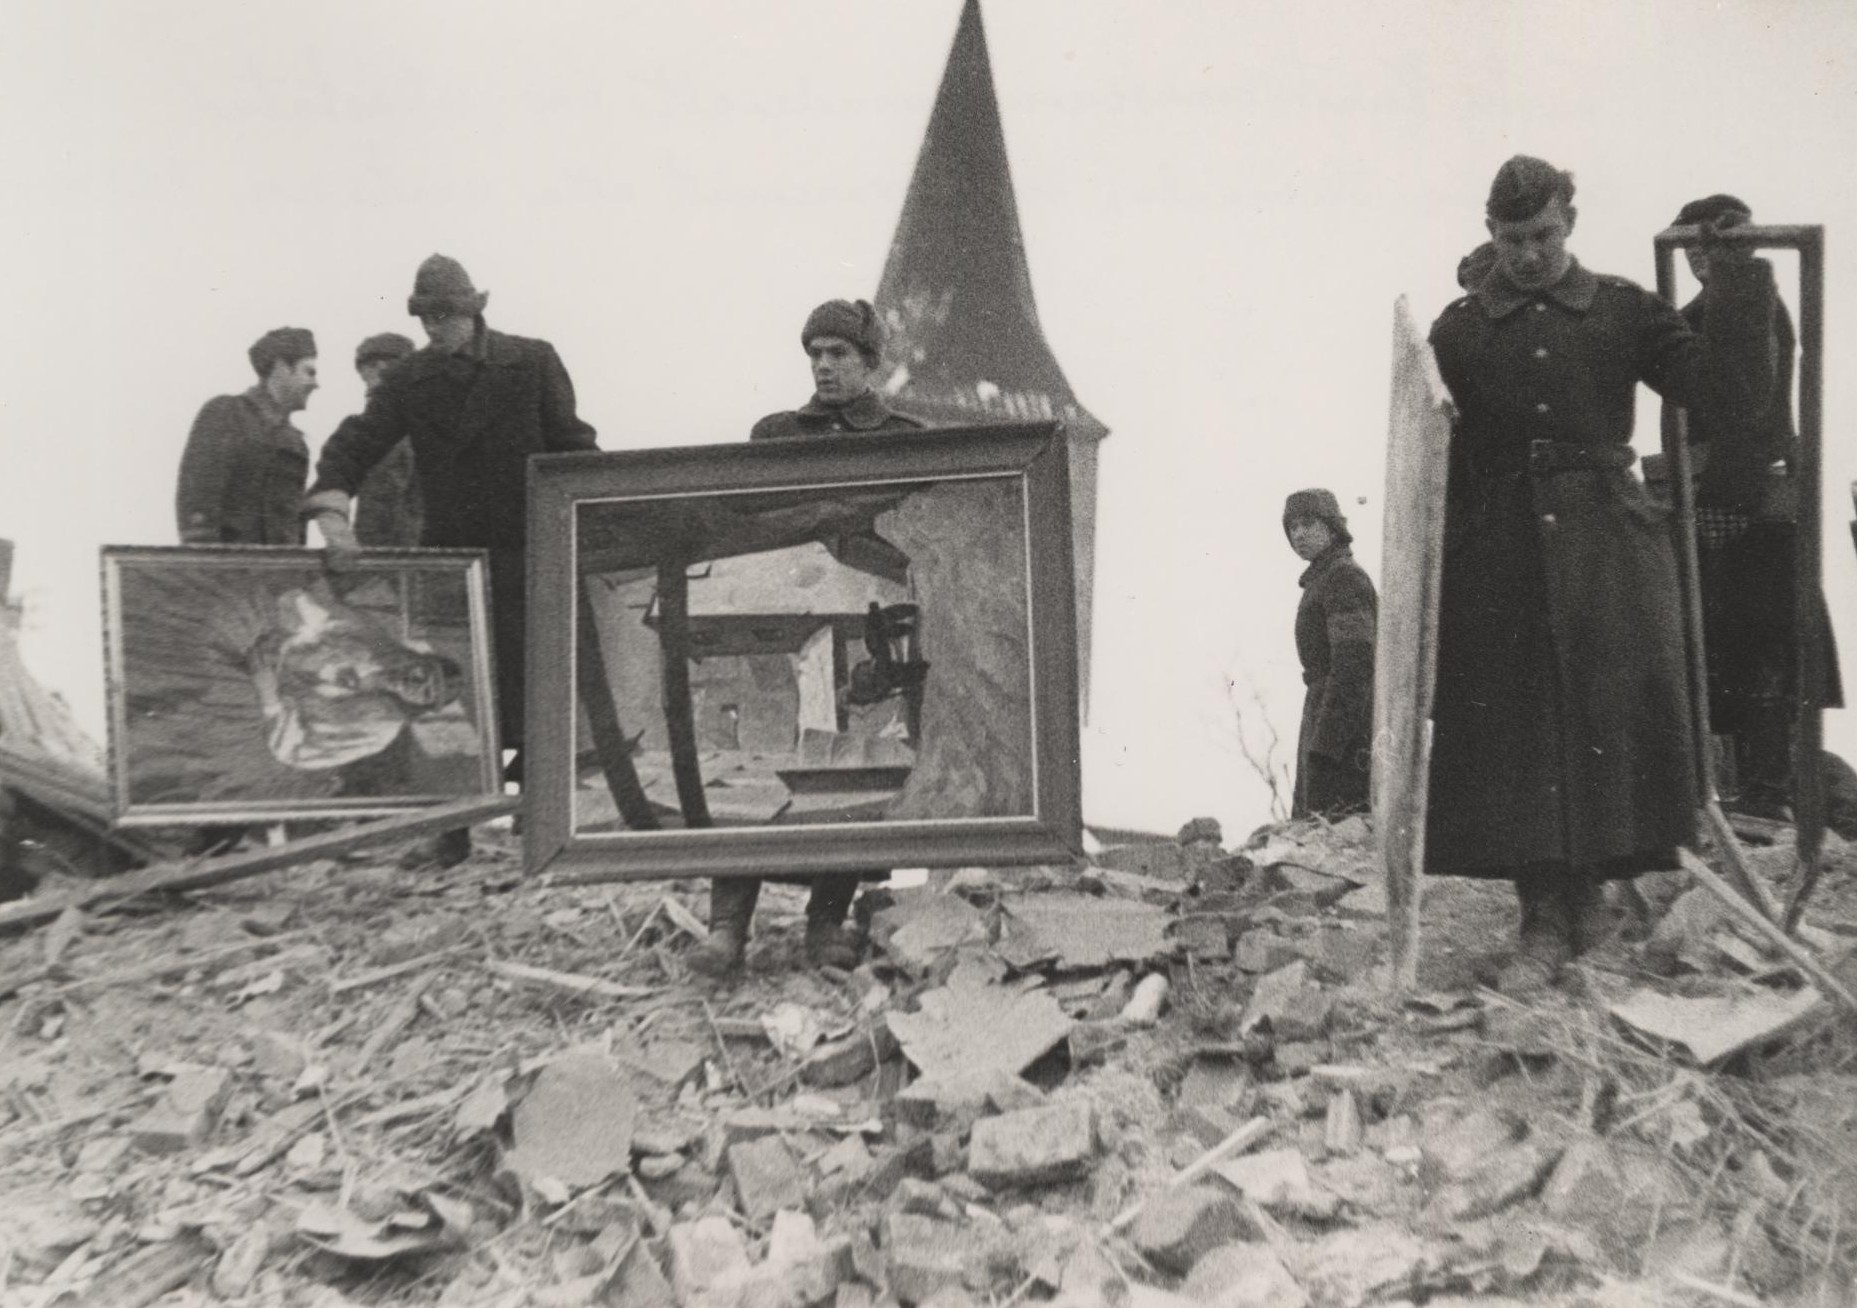 Saving oil paintings from the ruins on 29.01.1943.